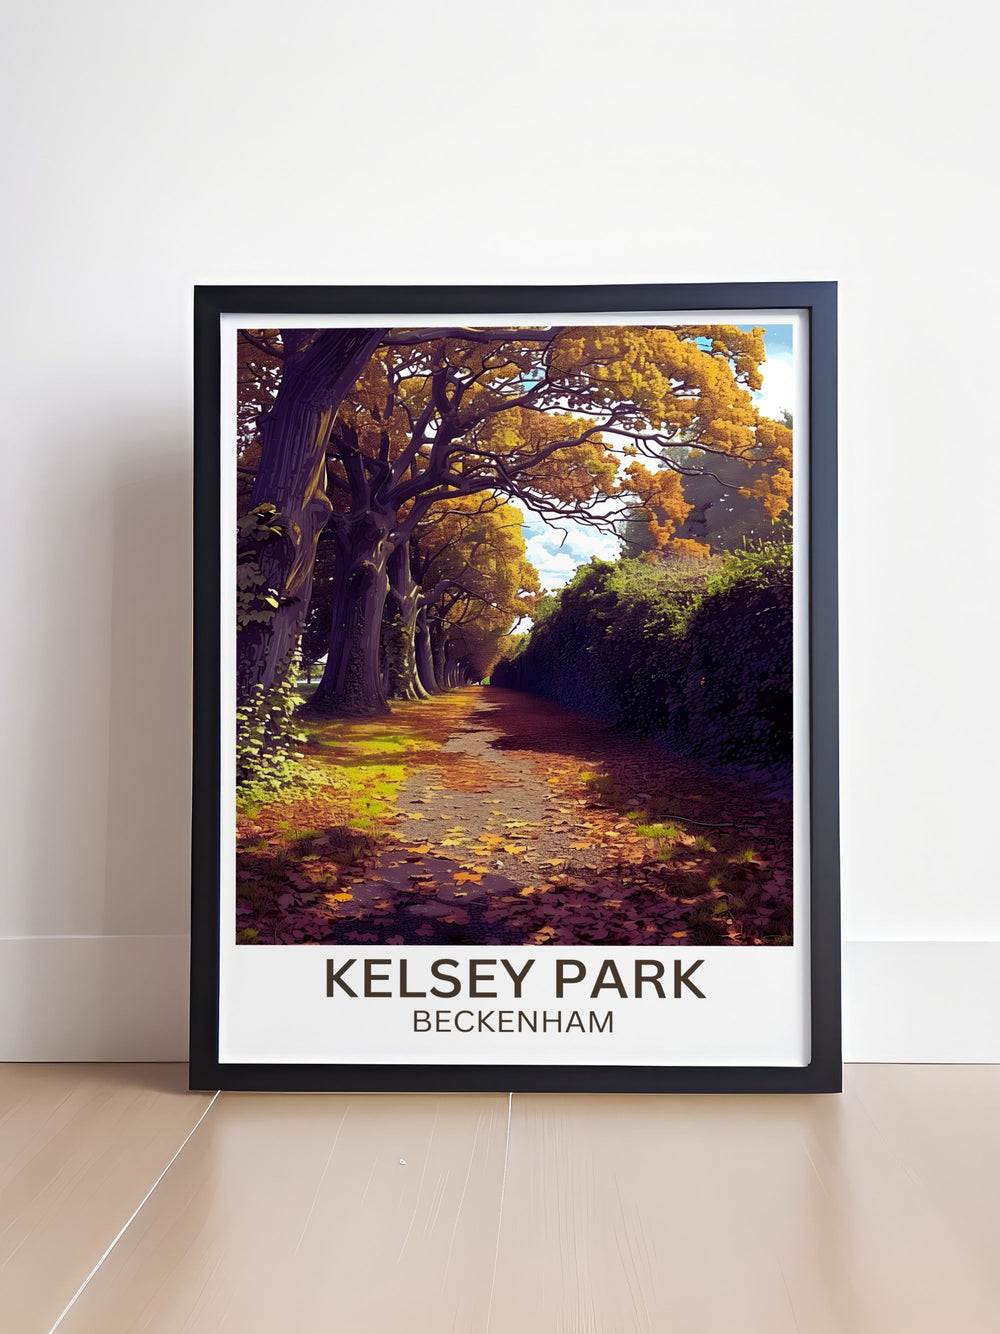 Artistic representation of the woodland walks in Kelsey Park featuring lush forest trails and natural scenery ideal for tranquil home decor